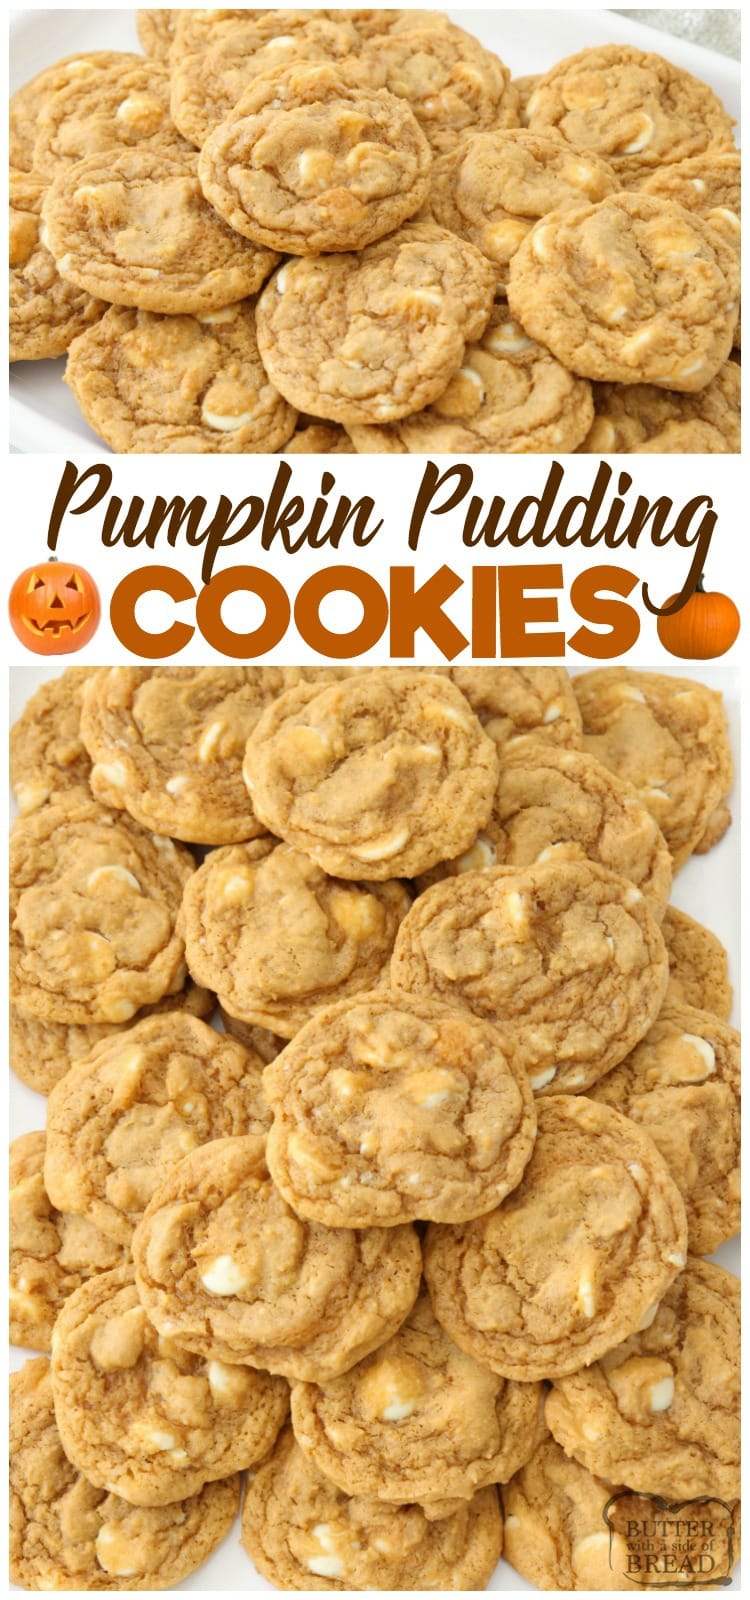 Pumpkin Pudding Cookies are soft, sweet & pumpkin spiced with pudding mix for the best flavor & texture. Easiest #pumpkin #cookies ever from Butter With A Side of Bread